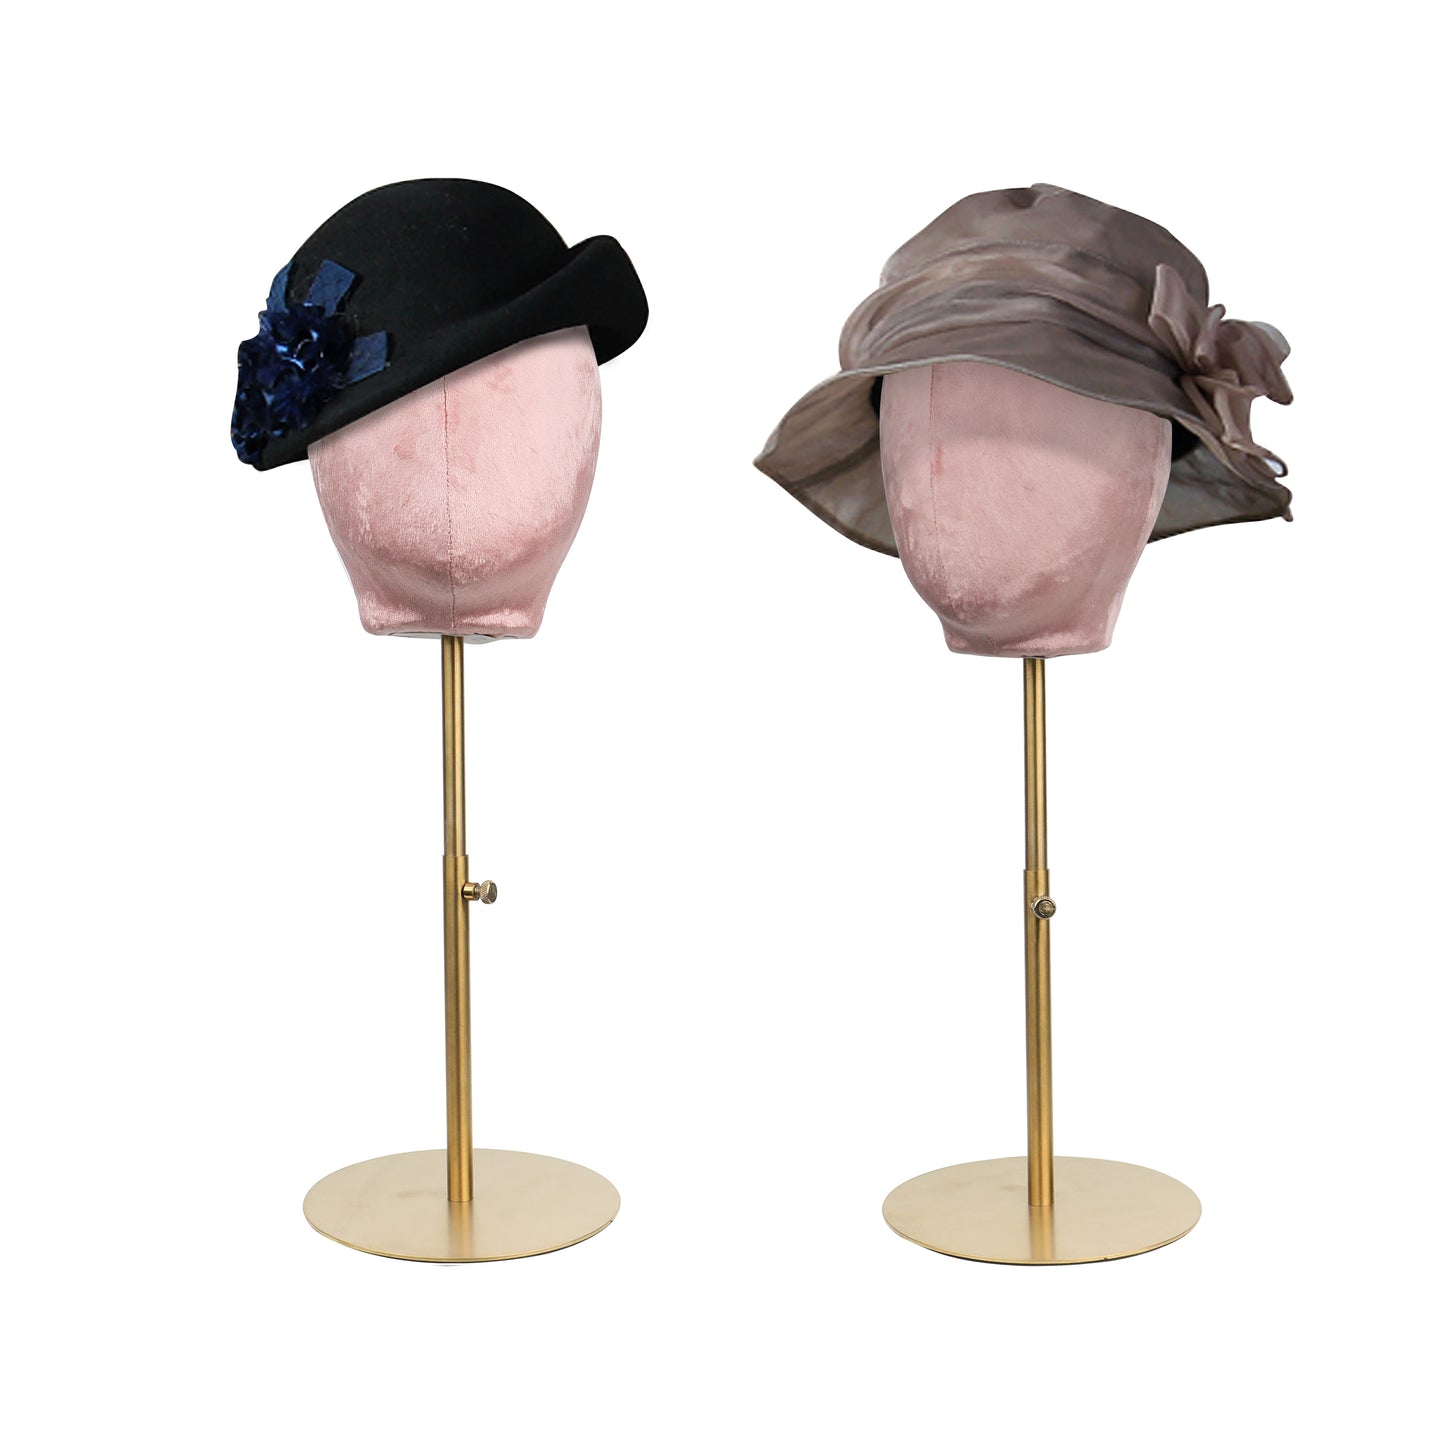 Head Stand Female Tailor Velvet Sewing Draping Headband Mannequin can be pinnable, Hat fabric model Dummies for scarves display Wig stand